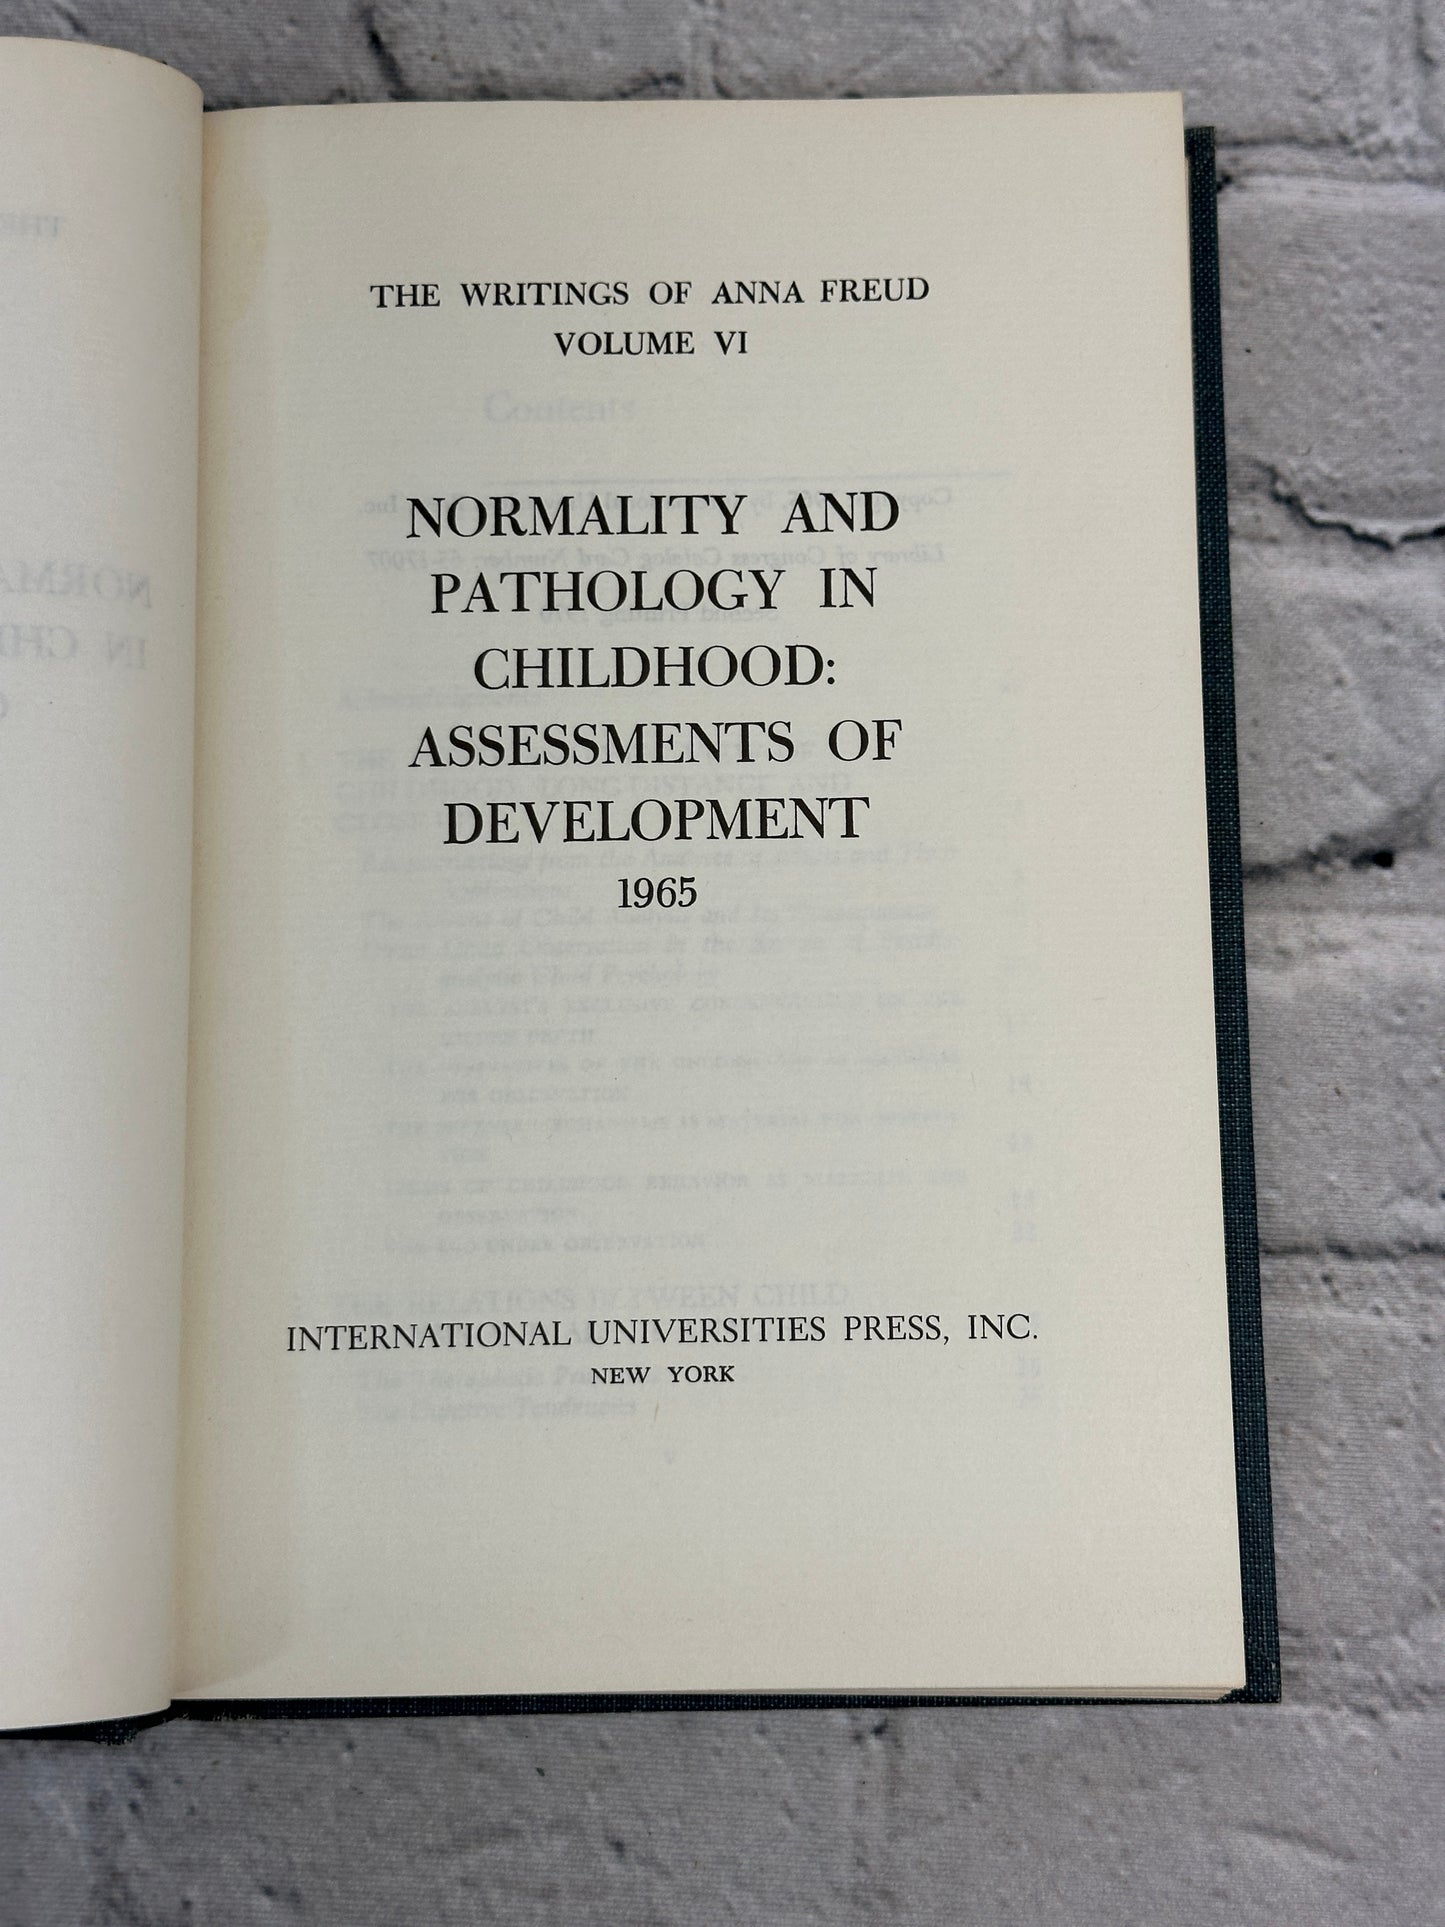 The Writings of Anna Freud Volume VI [1970 · Second Printing]